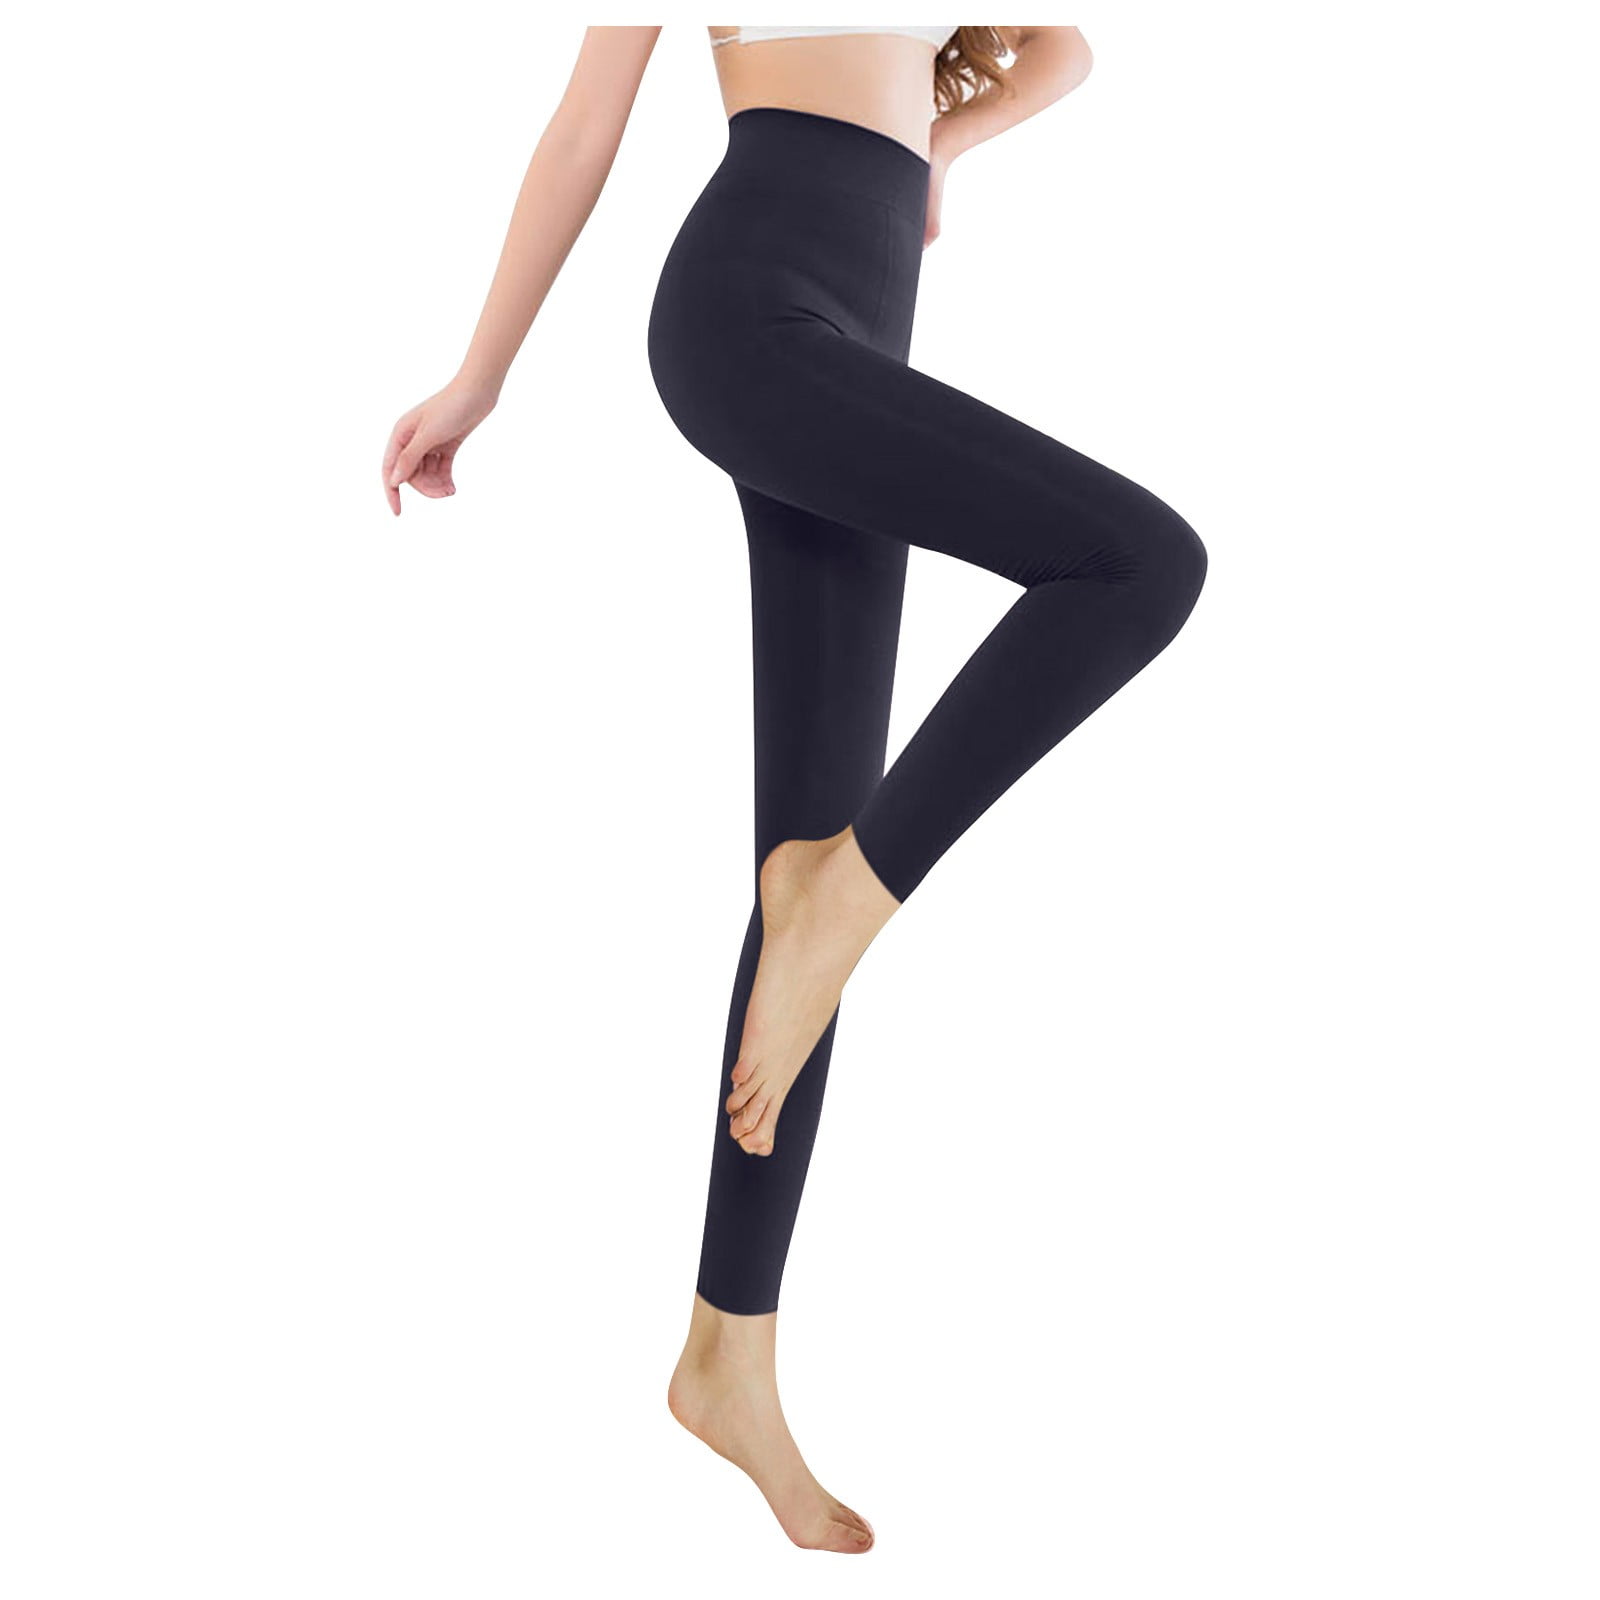 Soft Clouds Fleece Leggings for Women - Casual Warm Winter Pants, Slim Fit  Thermal Tights with Fleece Lining (Color : A1 Black, Size : M) :  : Fashion